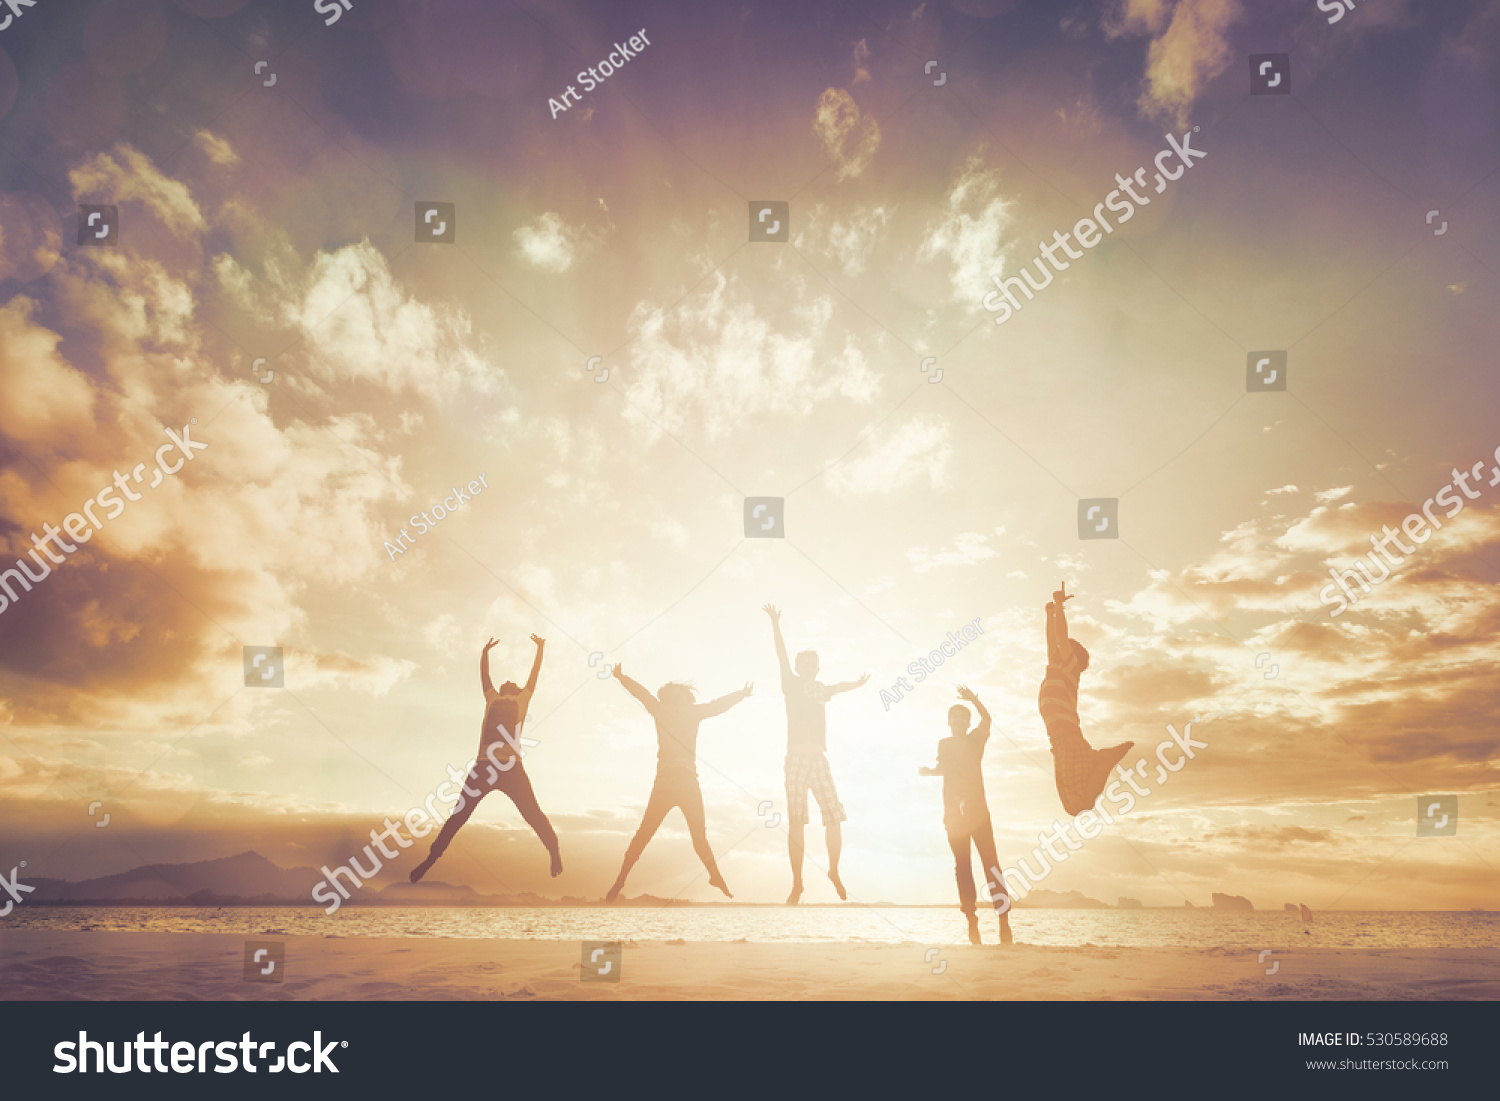 People insurance team feel enjoy meeting and retreat of friend support celebrate win freedom financial in morning landscape weekend concept for good family life travel day, happy sun wellness future  #530589688